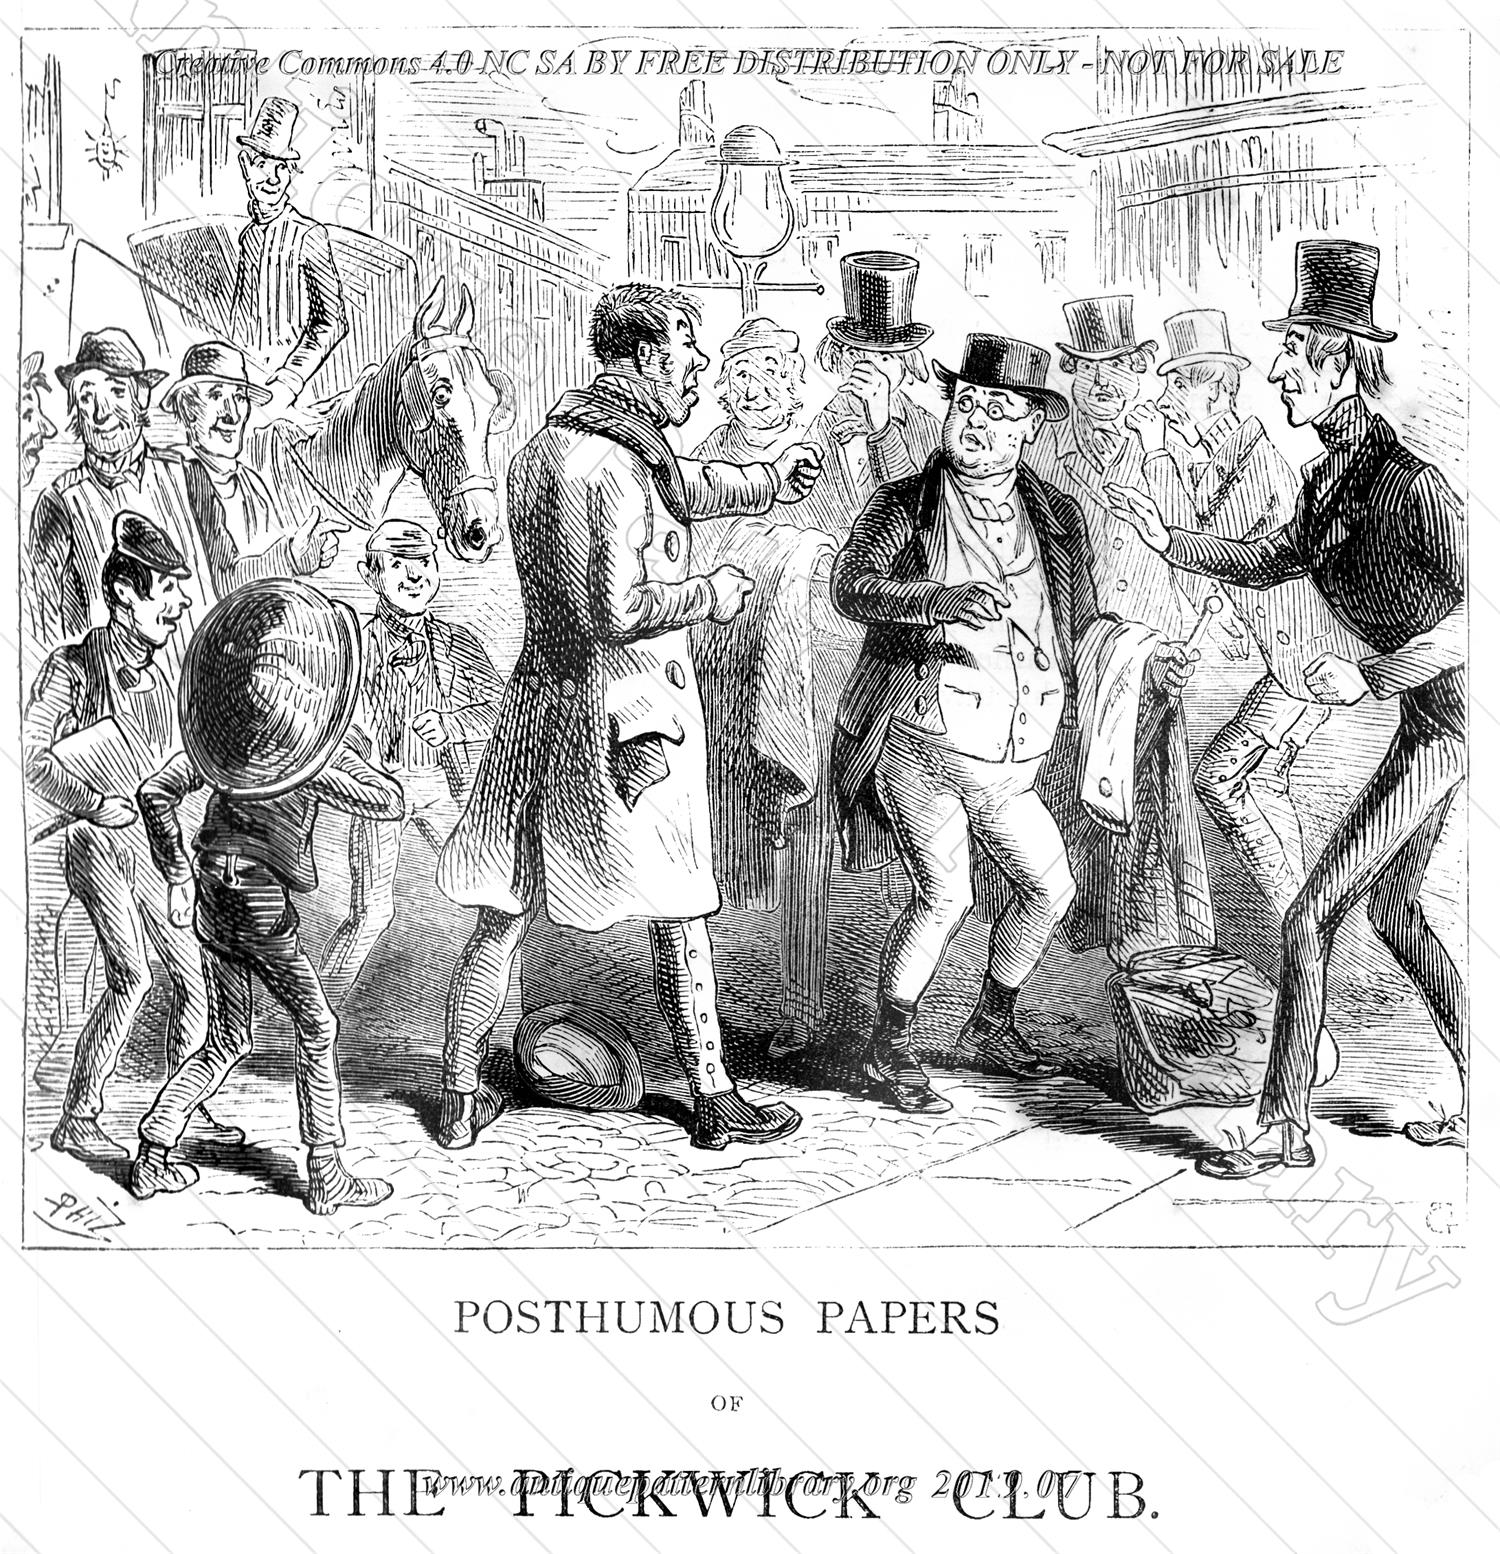 I-FW003 The Pickwick Papers